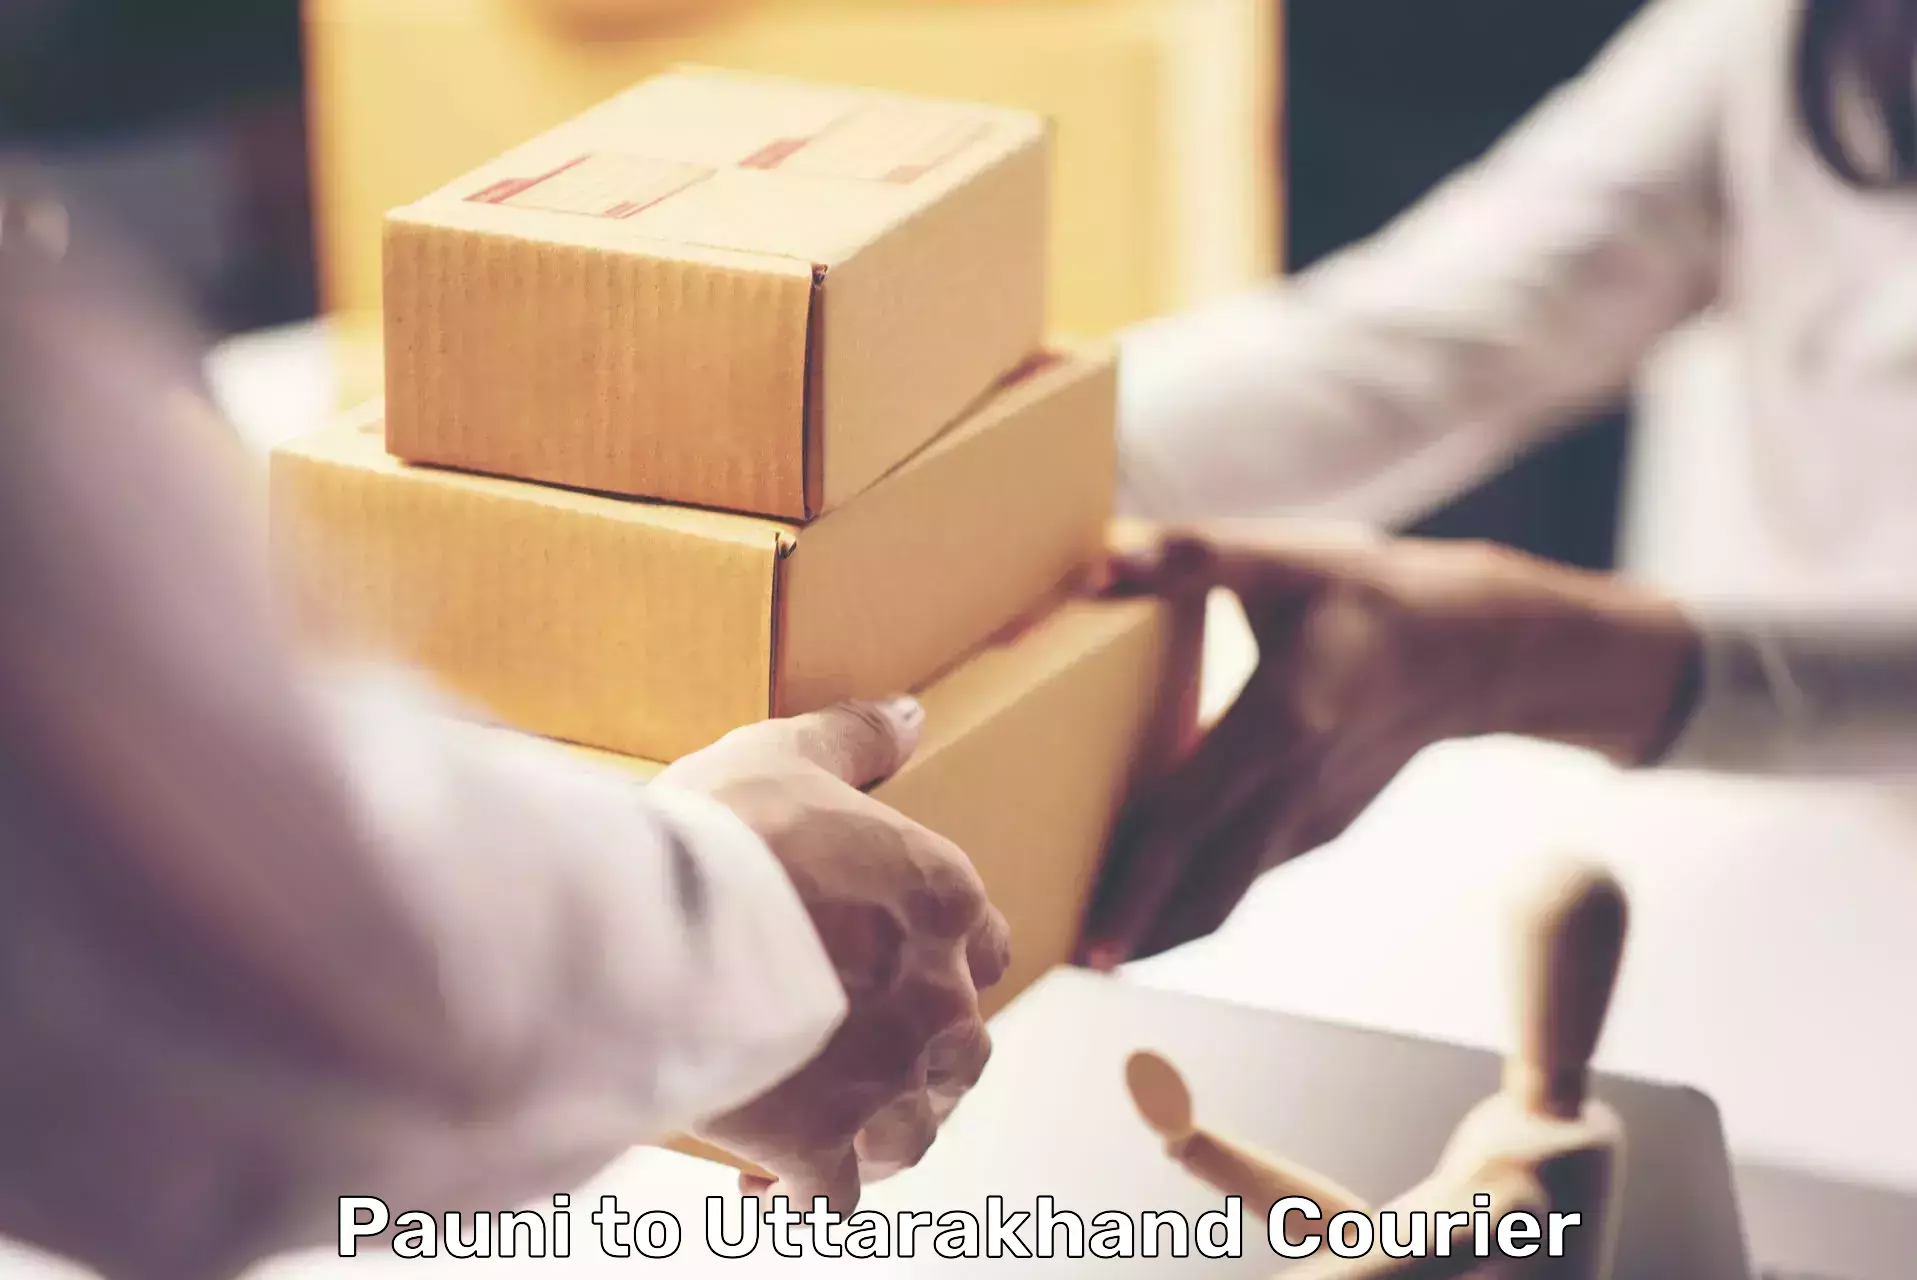 Customer-oriented courier services Pauni to Uttarakhand